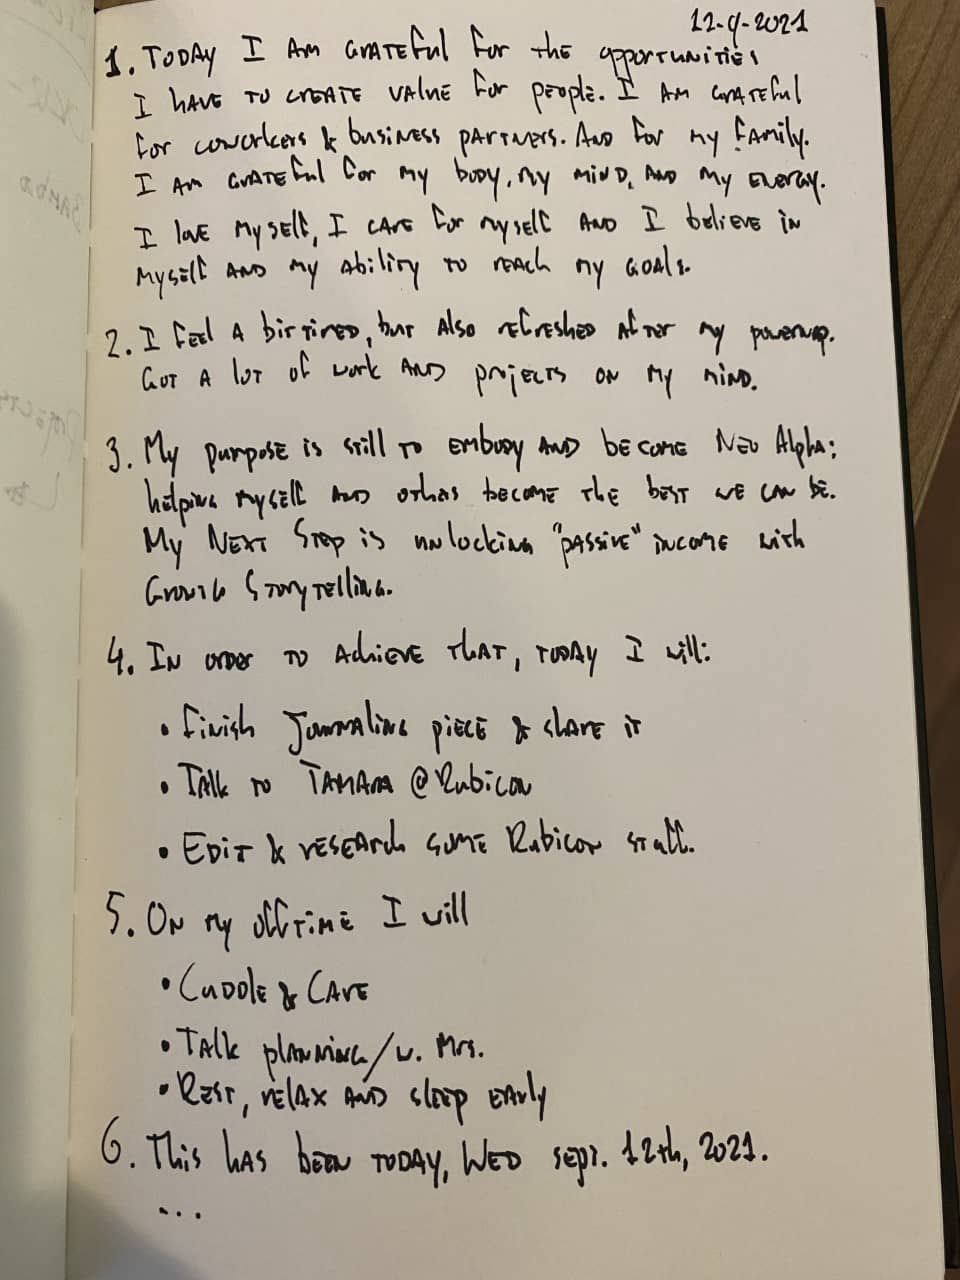 personal growth journal example